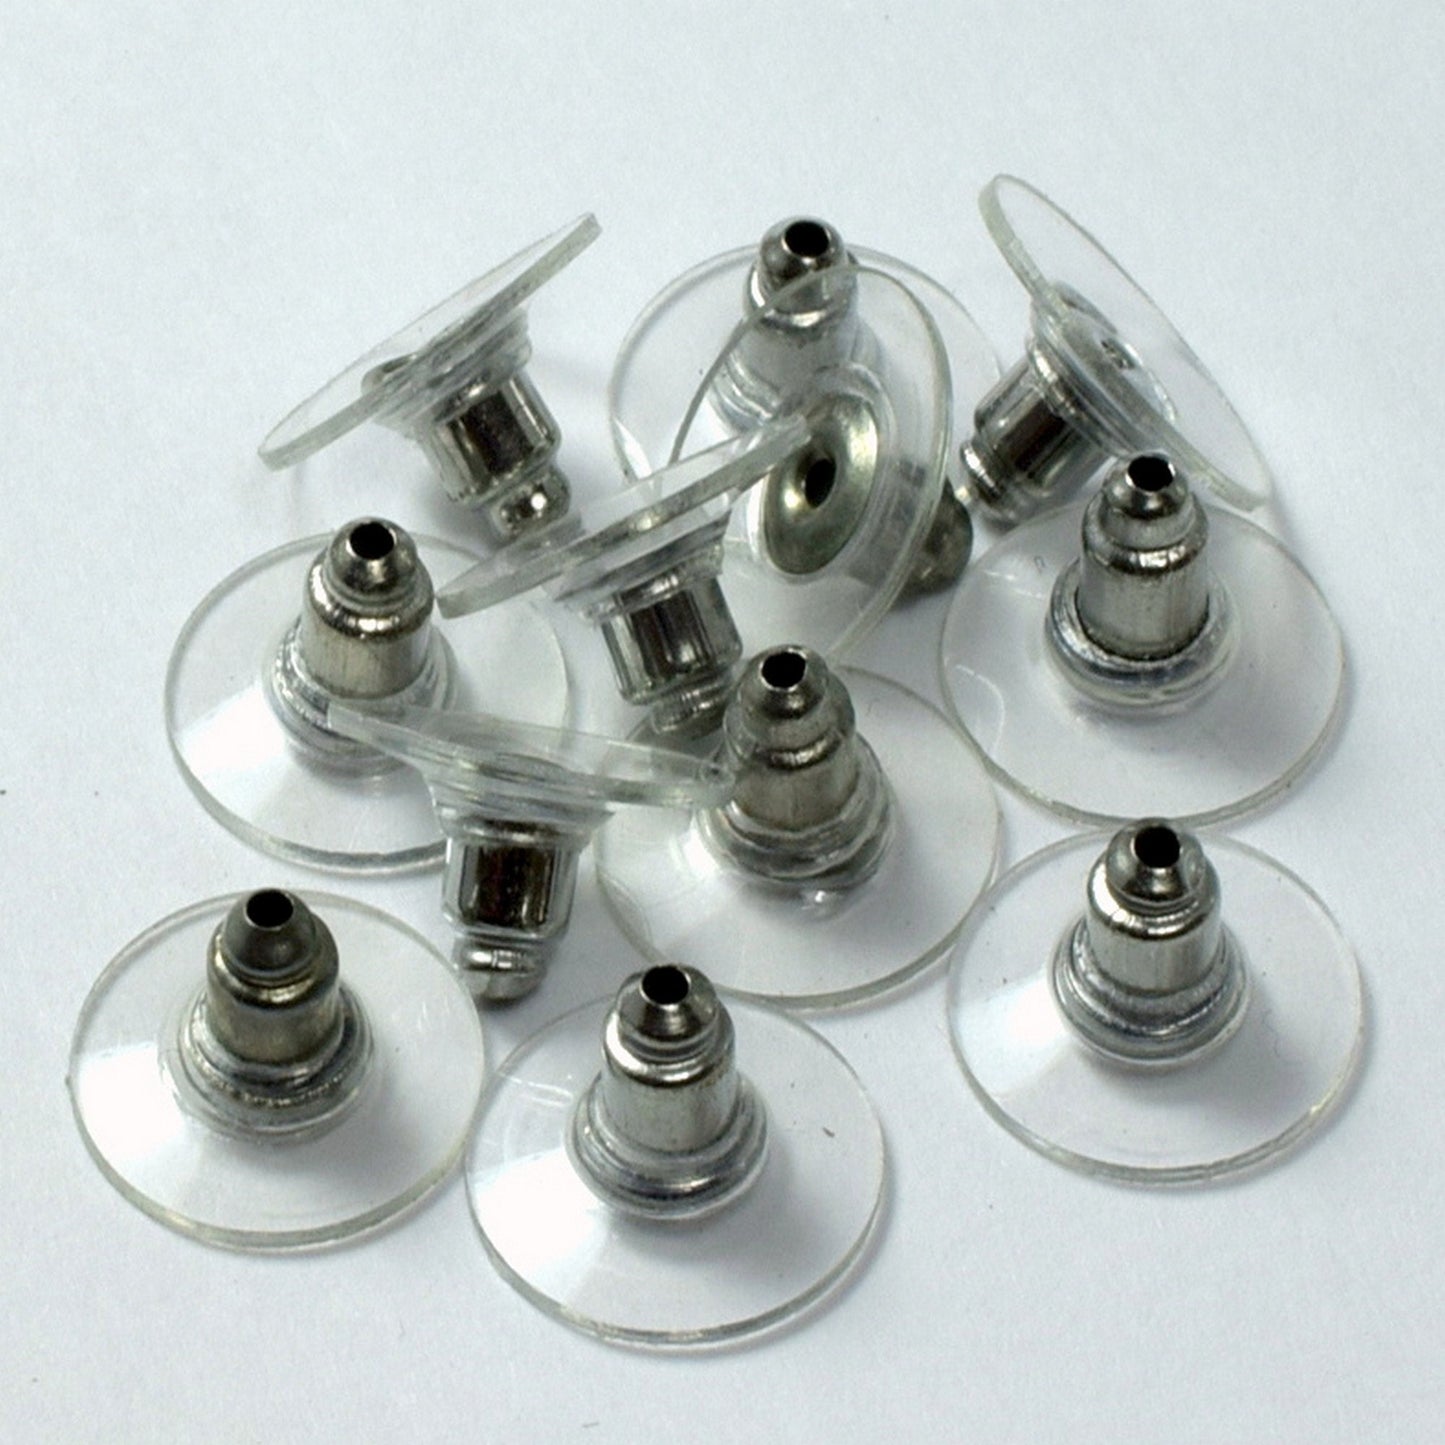 Silicon Clear Stainless Steel Earring Backing 11mm and fit 0.8-1.0mm hole Replacement back Earring Lock comfort backing and smooth